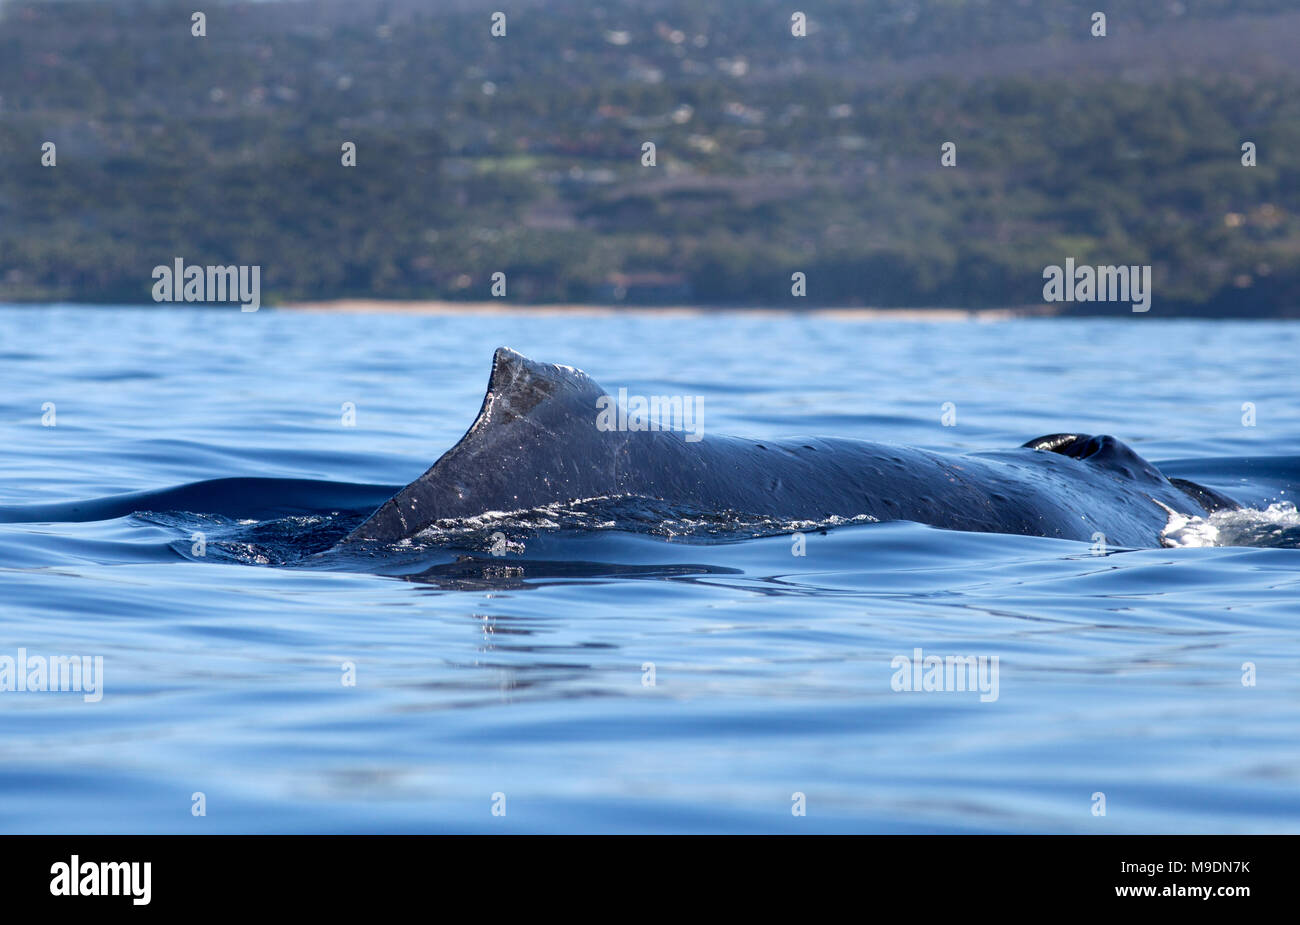 Humpback whales surfaces as seen from a kayak off Makena, Maui, Hawaii. Stock Photo